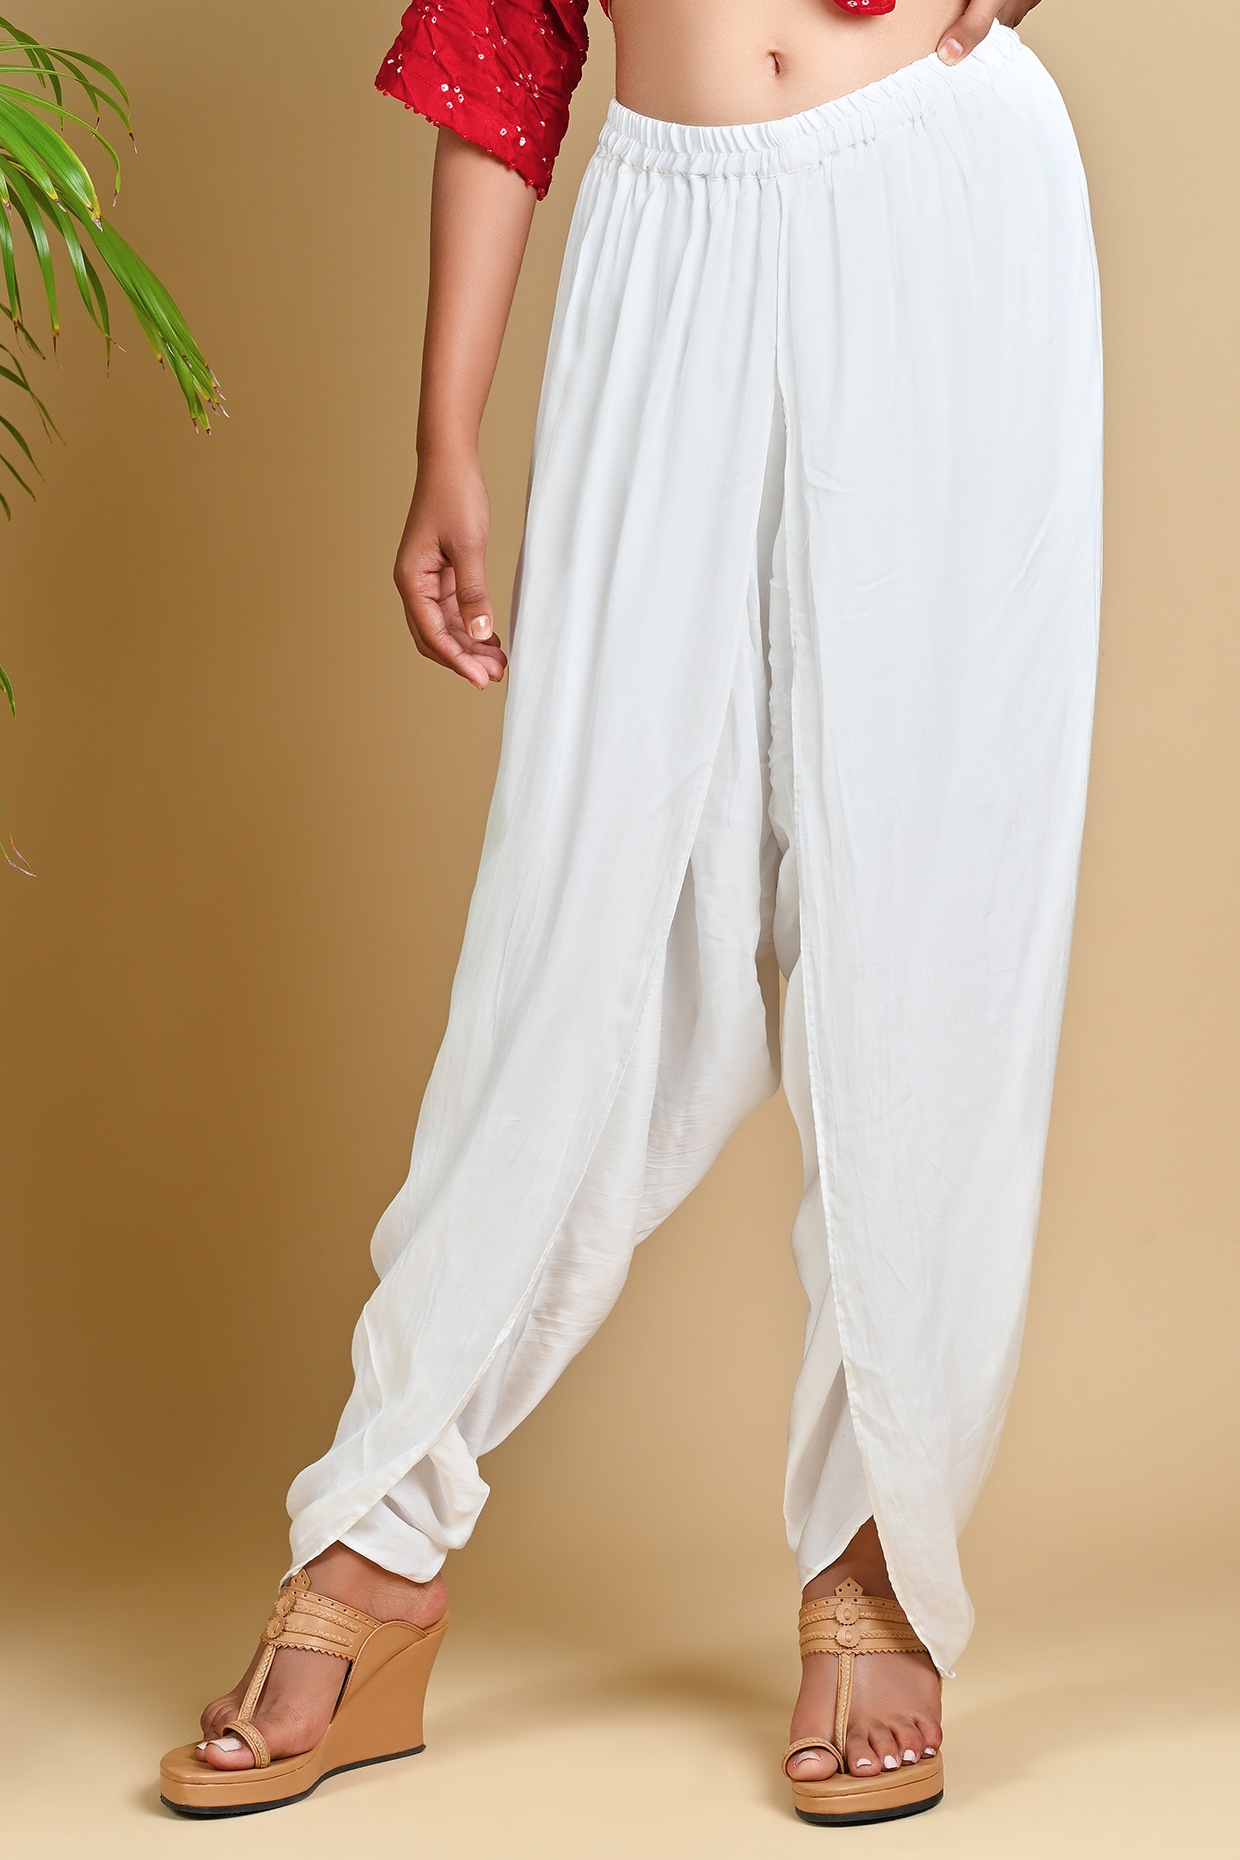 EMBROIDERED INDO WESTERN DHOTI PANT